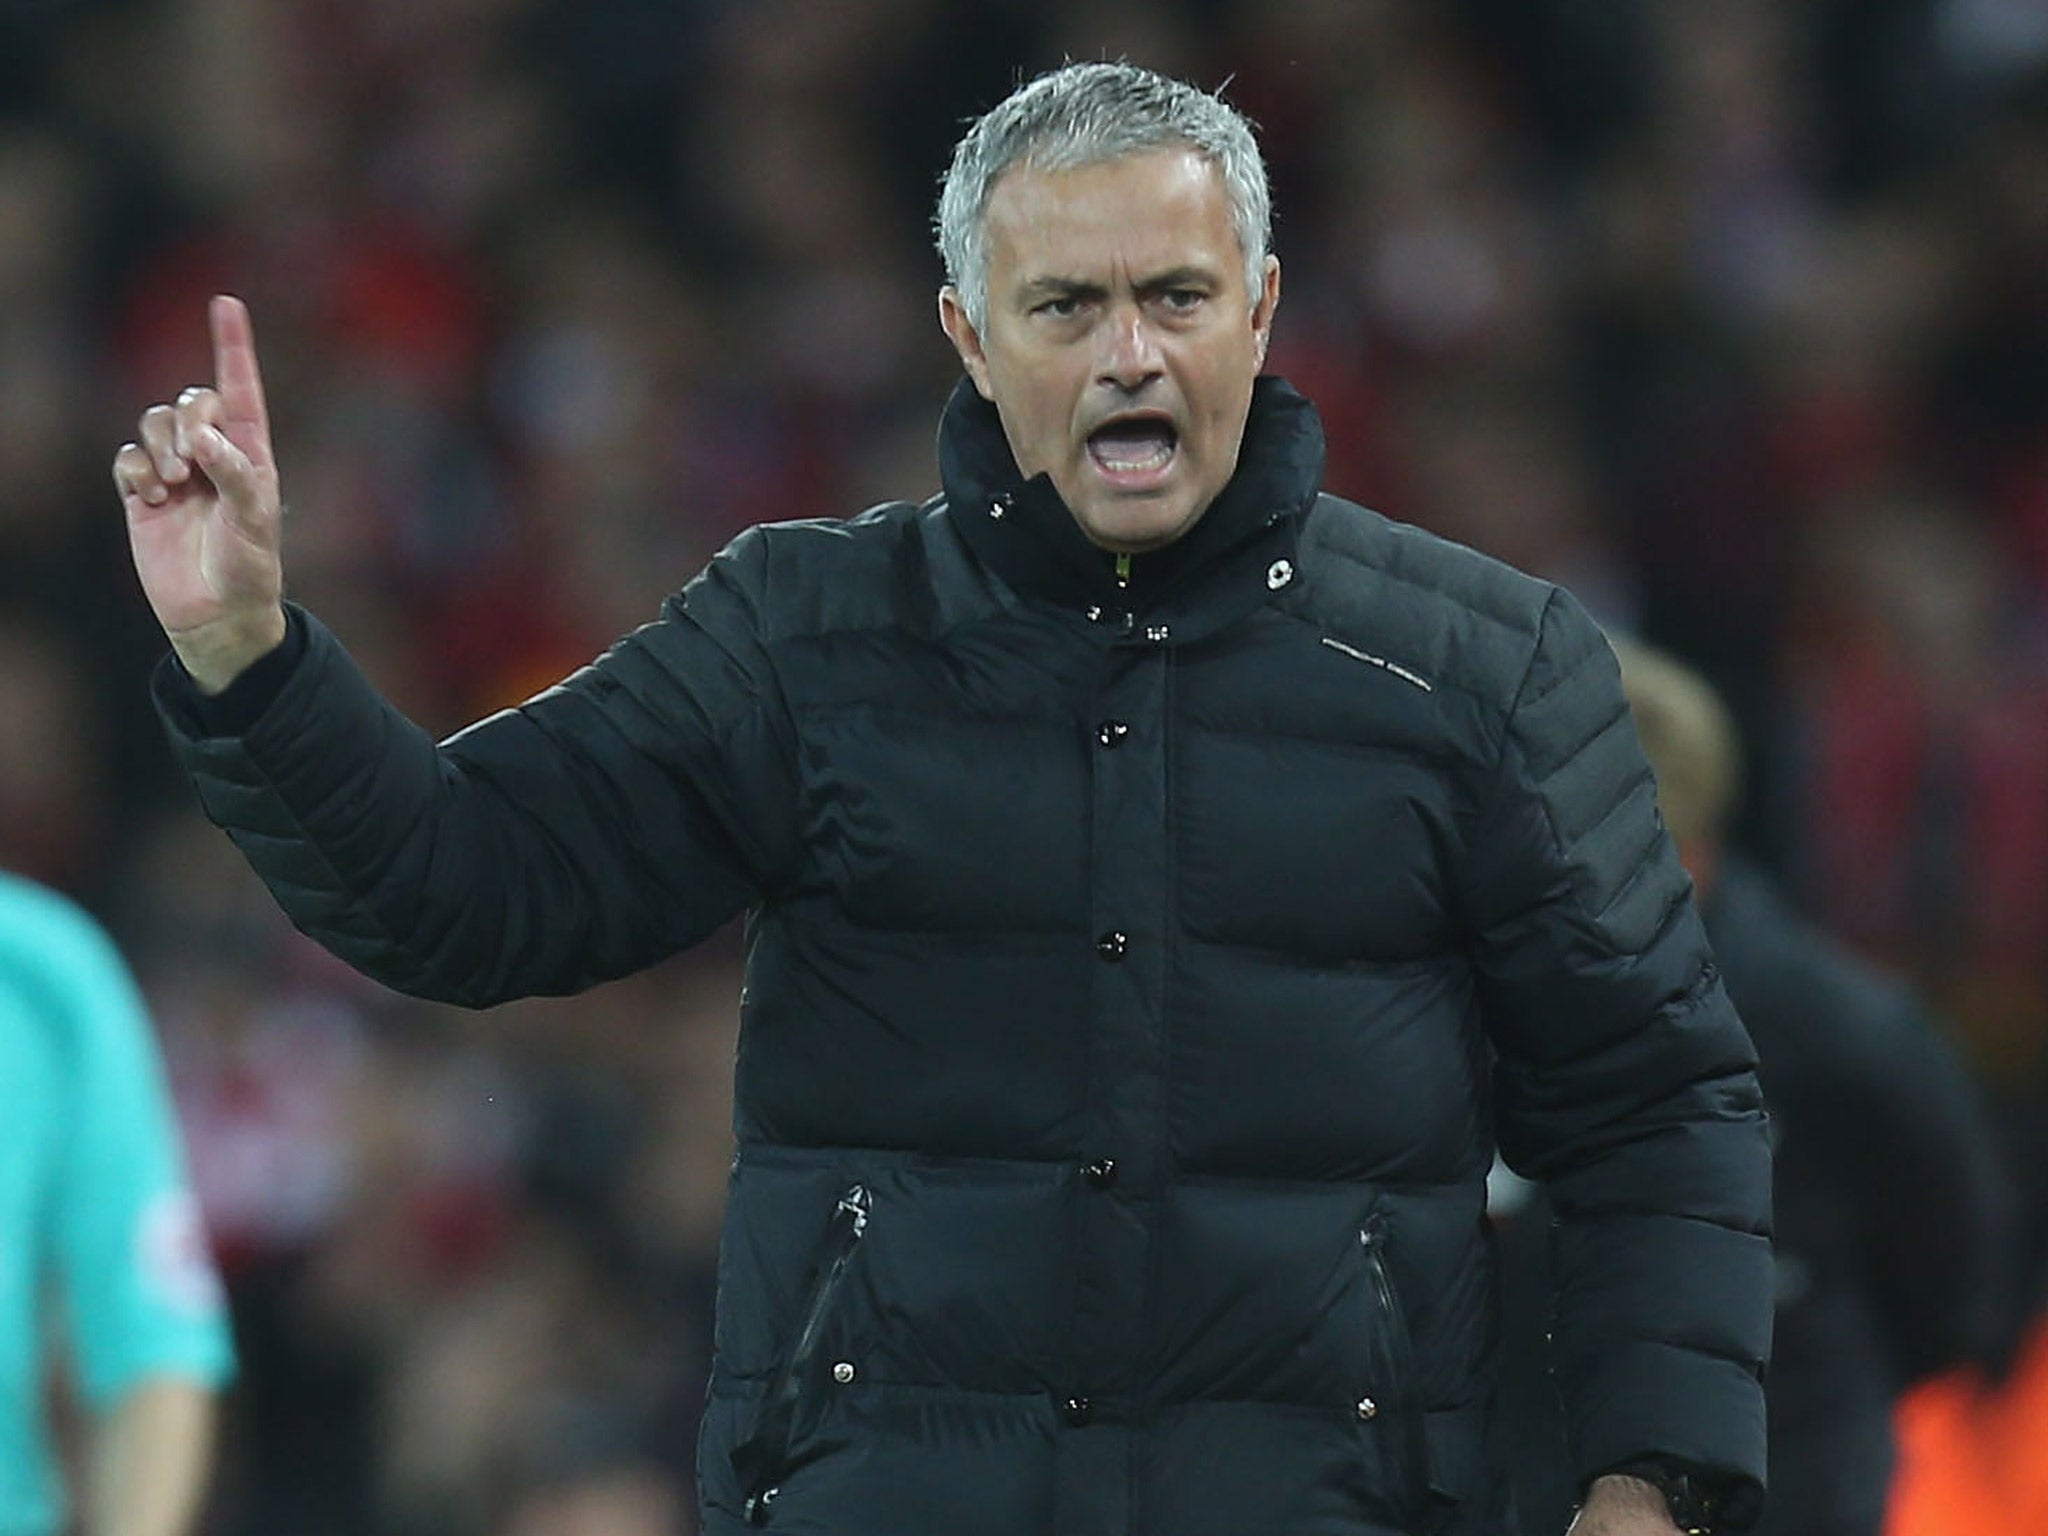 Gary Neville does not believe Jose Mourinho's Manchester United can win the title this season